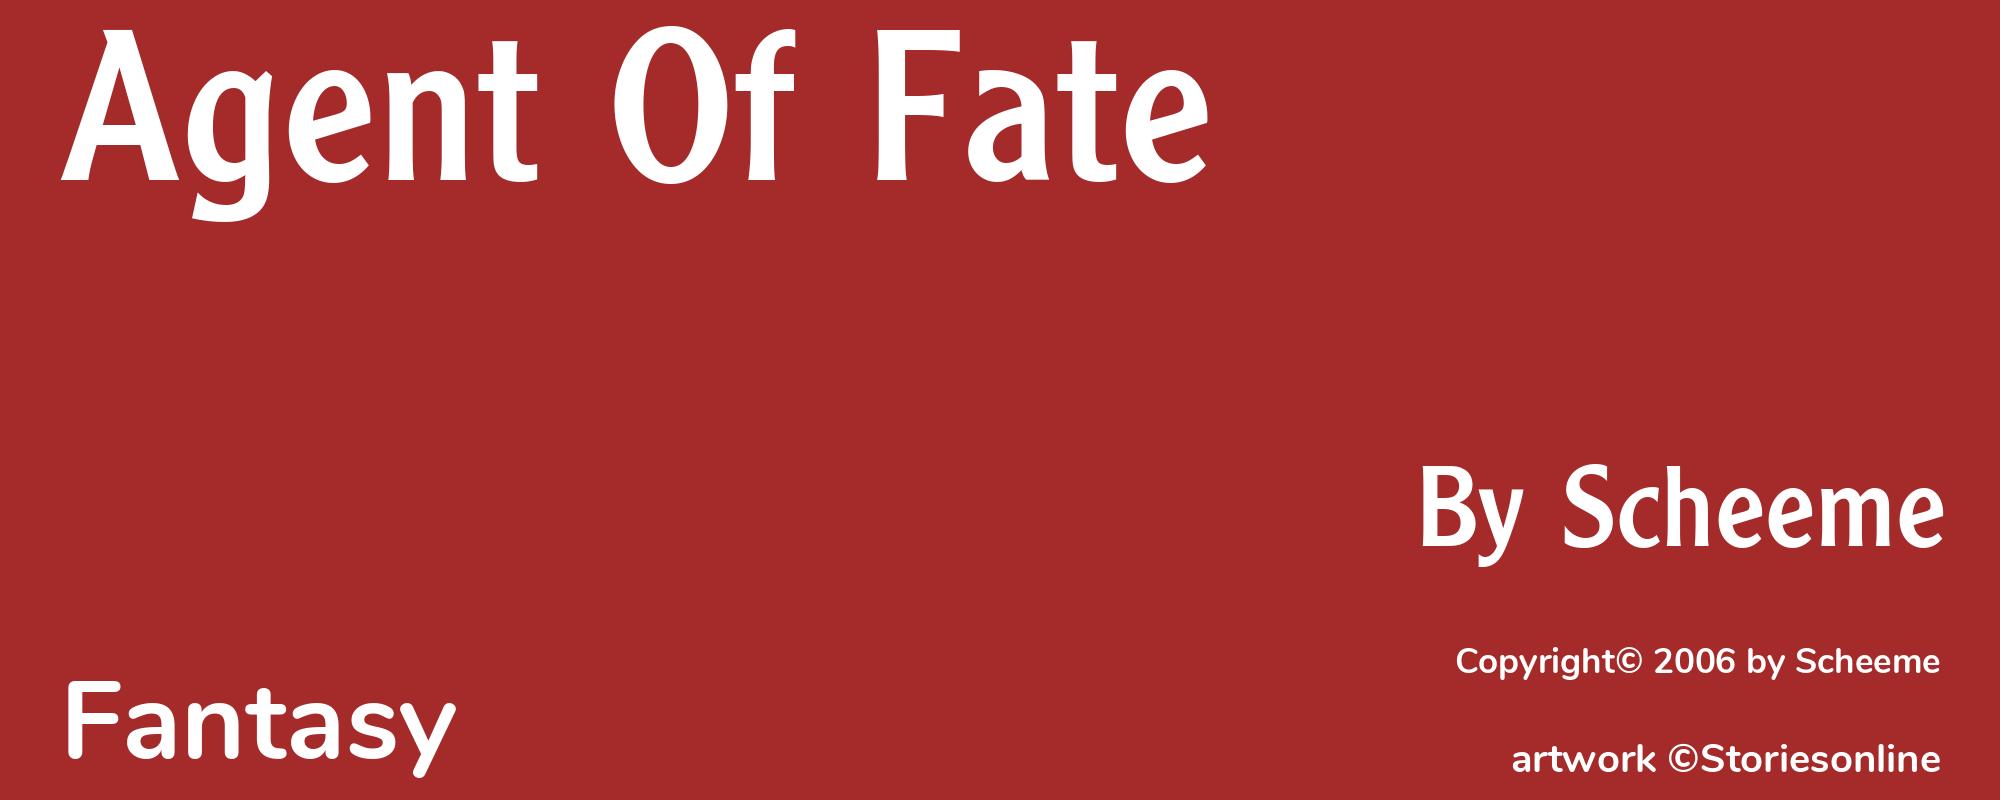 Agent Of Fate - Cover